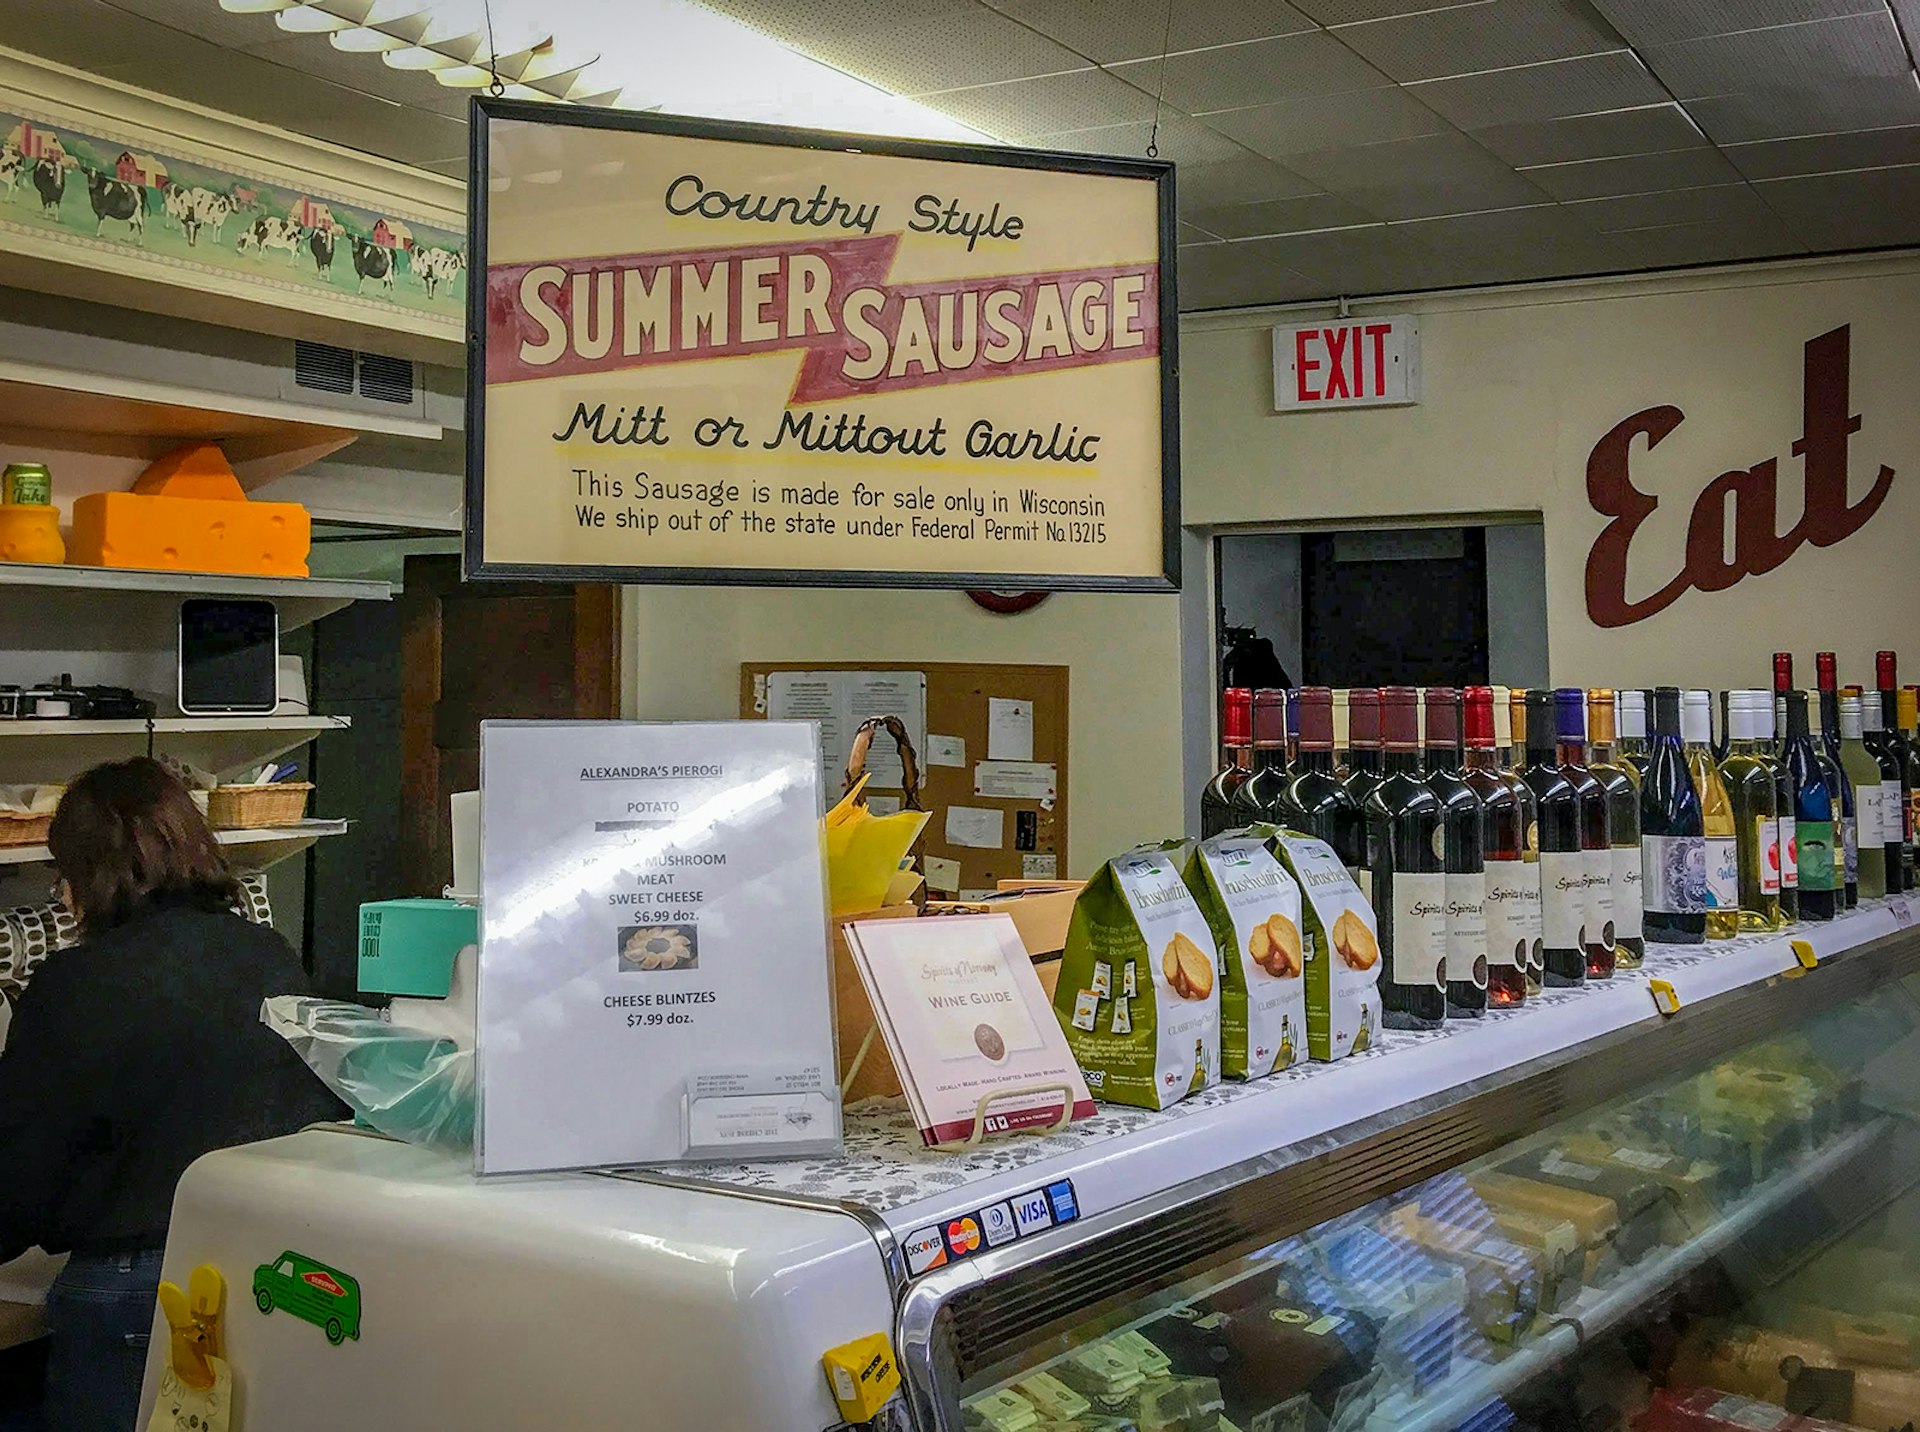 A deli counter lined with wine bottles underneath a sign advertising summer sausage in Geneva Lake, Wisconsin